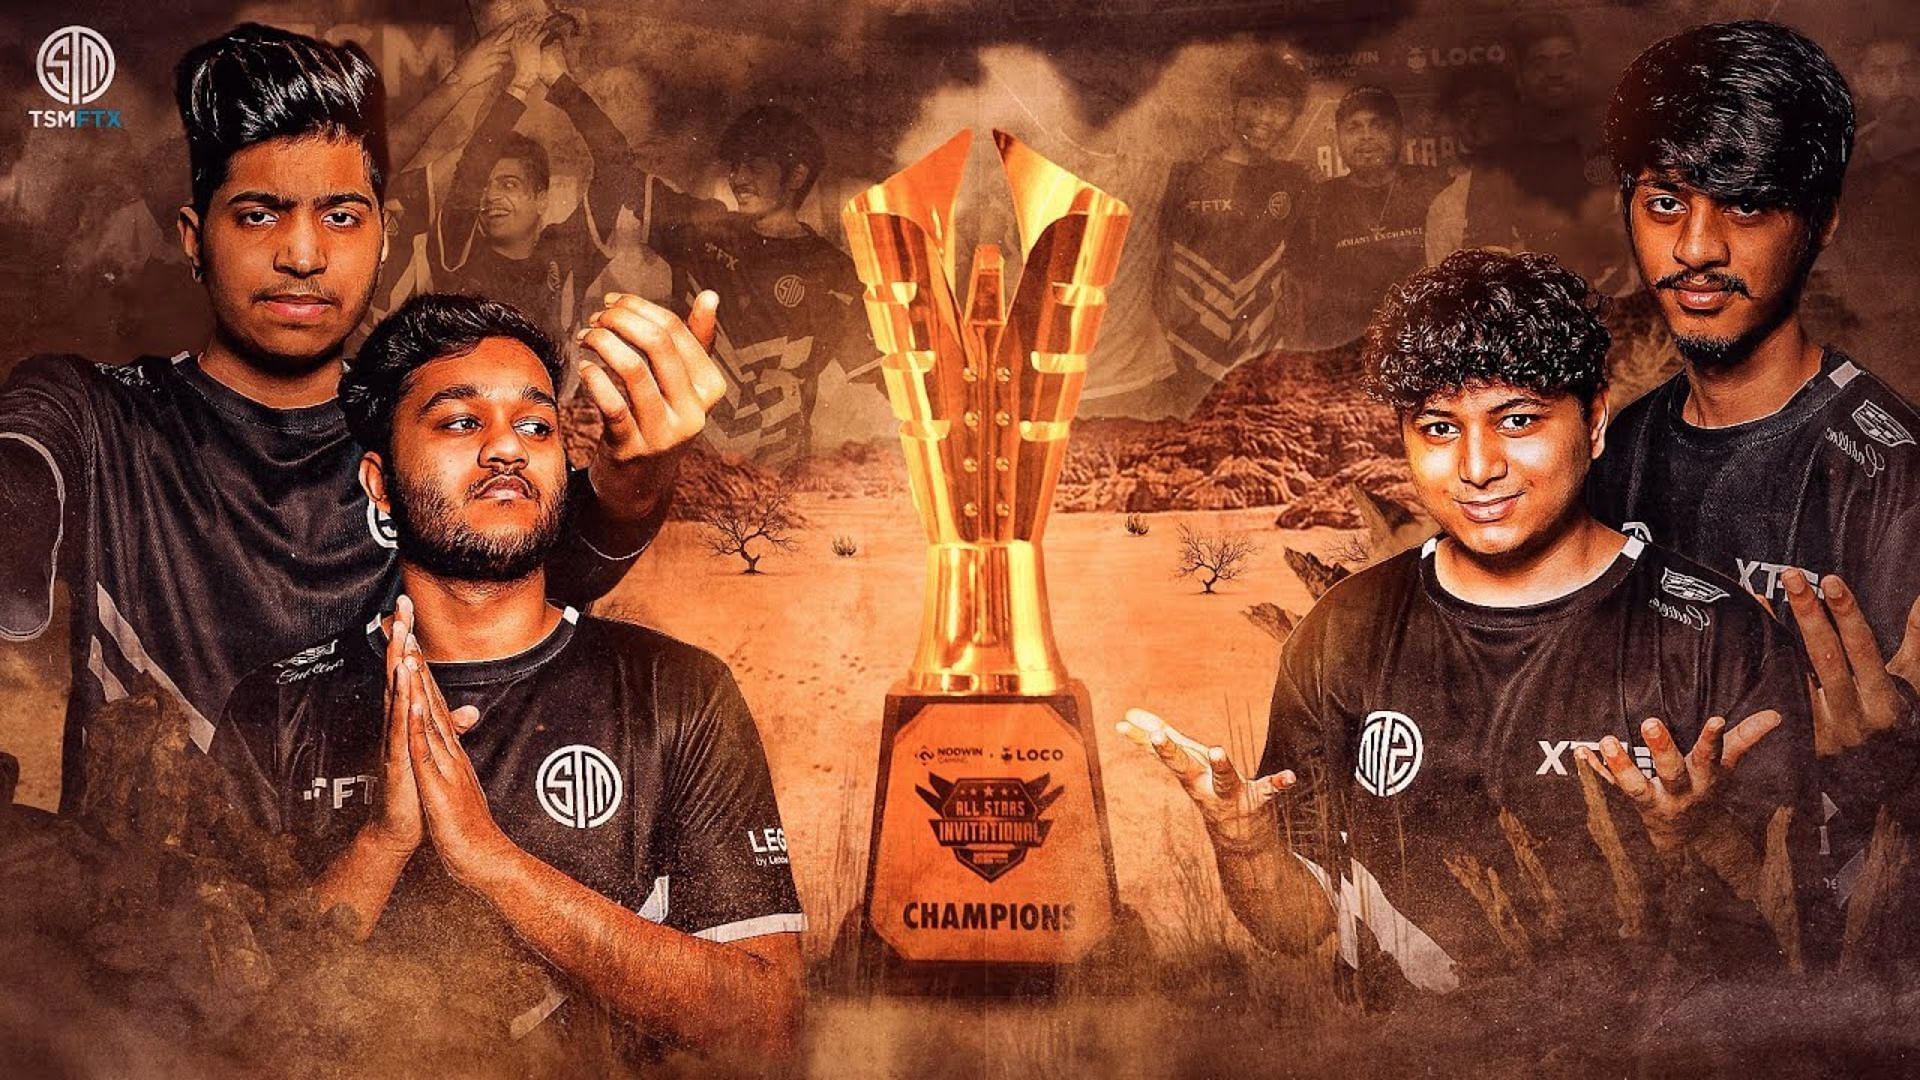 Team Solo Mid failed to secure their slot at the Battlegrounds Mobile Pro Series Season 1 (Image via TSM India/YouTube)